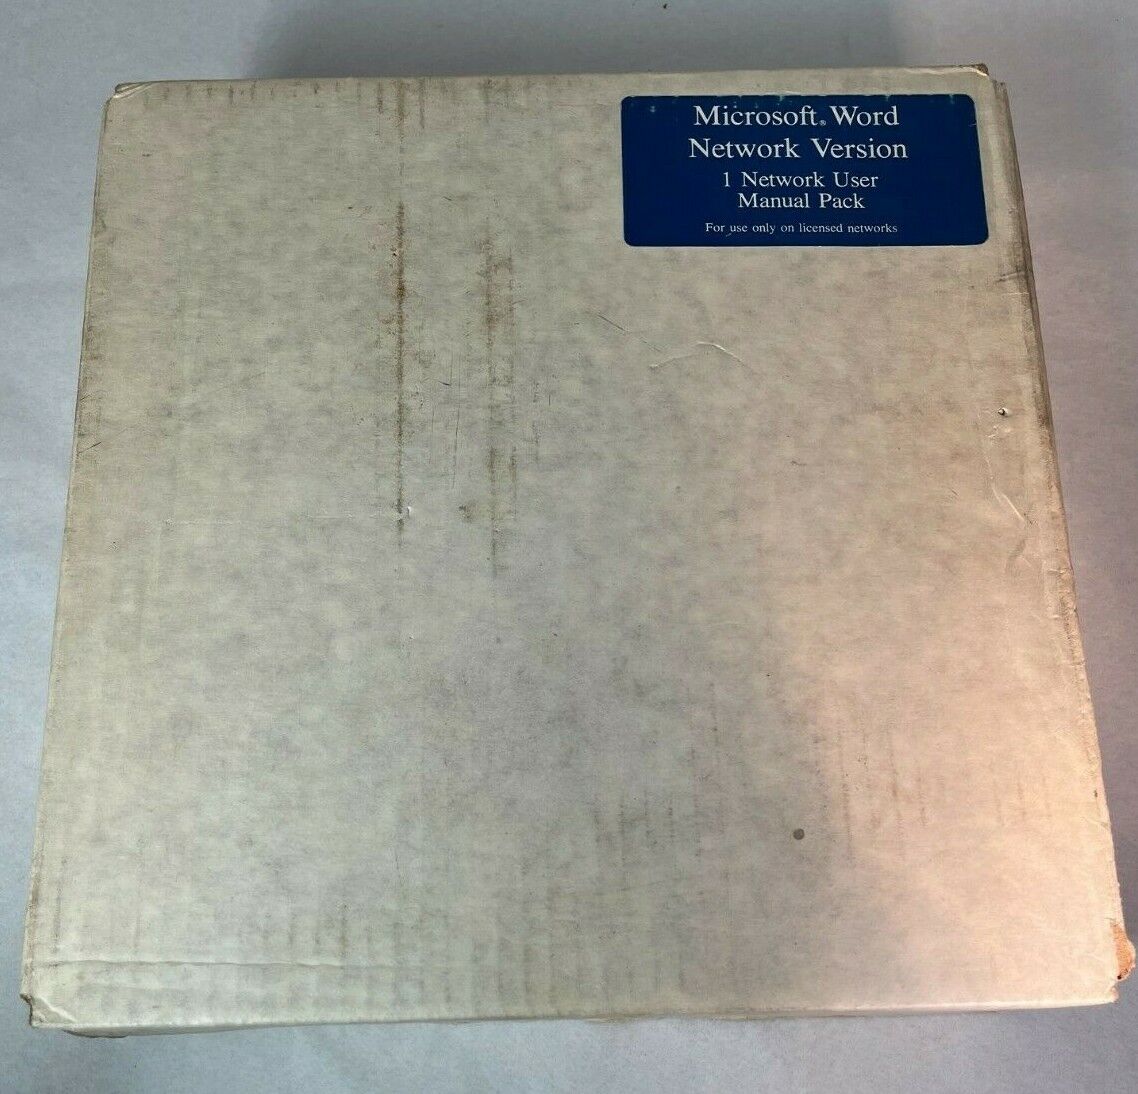 Rare New Old Stock Microsoft Word Network Version - 1 Network User Manual Pack